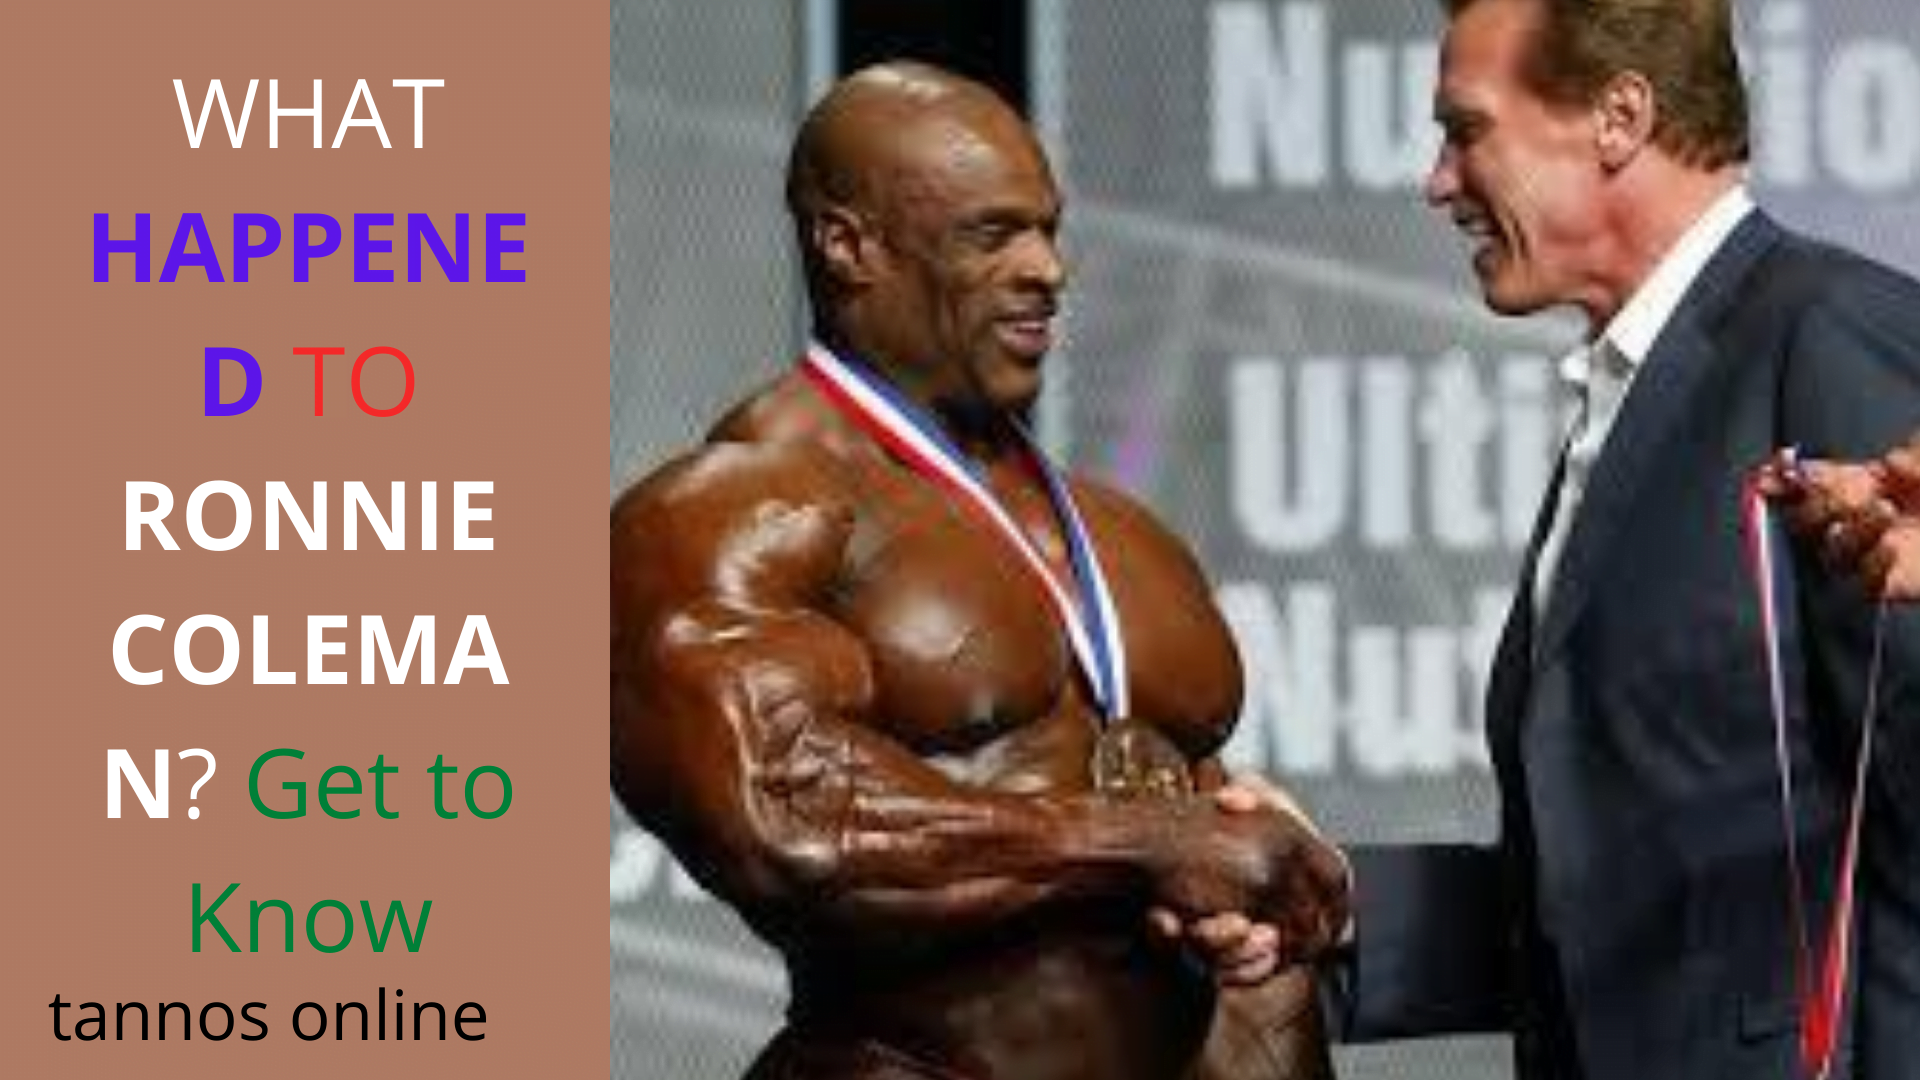 What happened to ronnie coleman